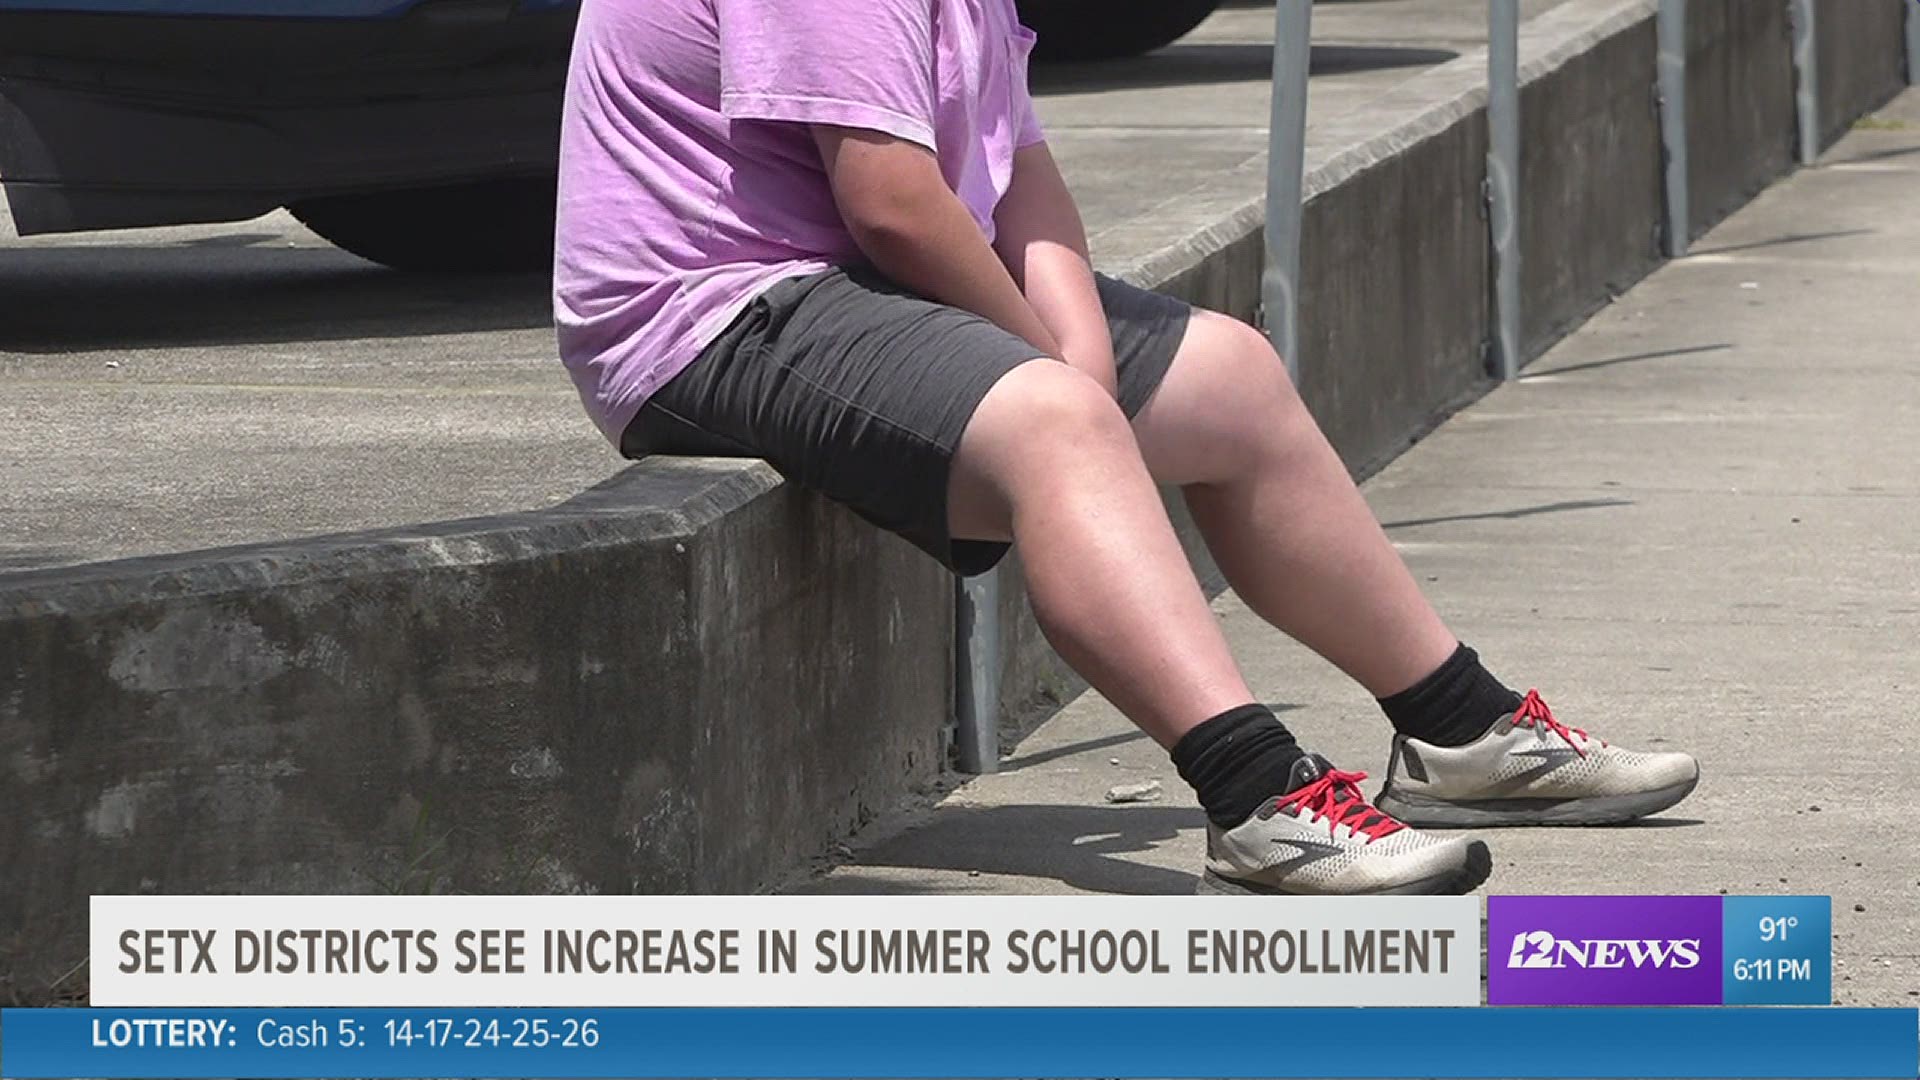 With some students responding to virtual learning better than others, there is no question that the pandemic has increased summer school enrollment.